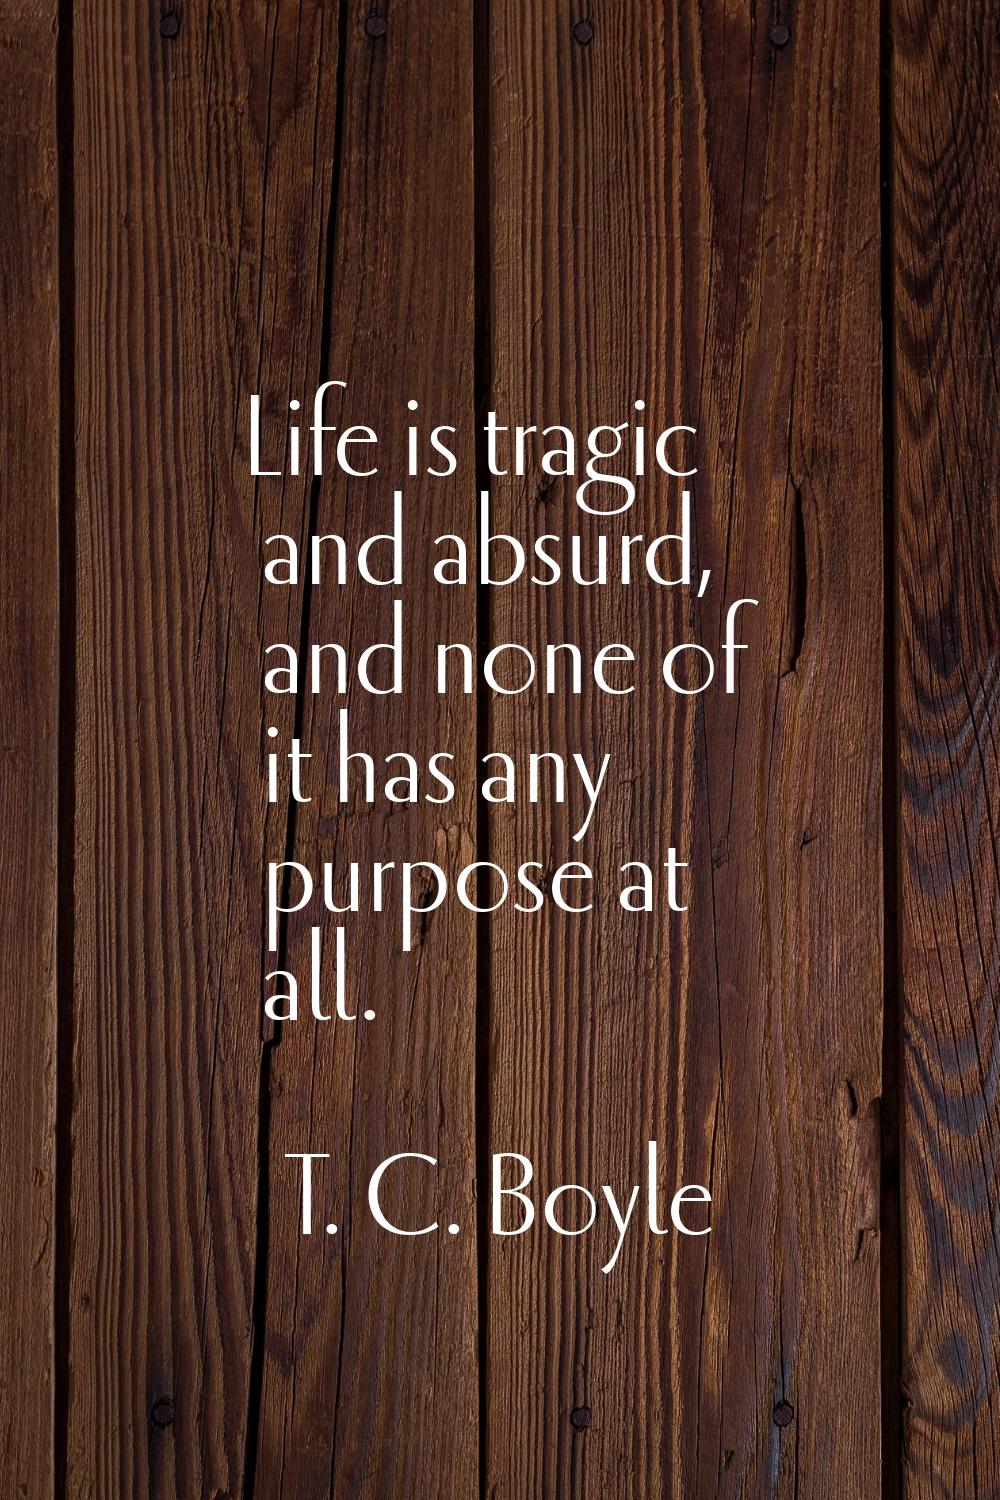 Life is tragic and absurd, and none of it has any purpose at all.